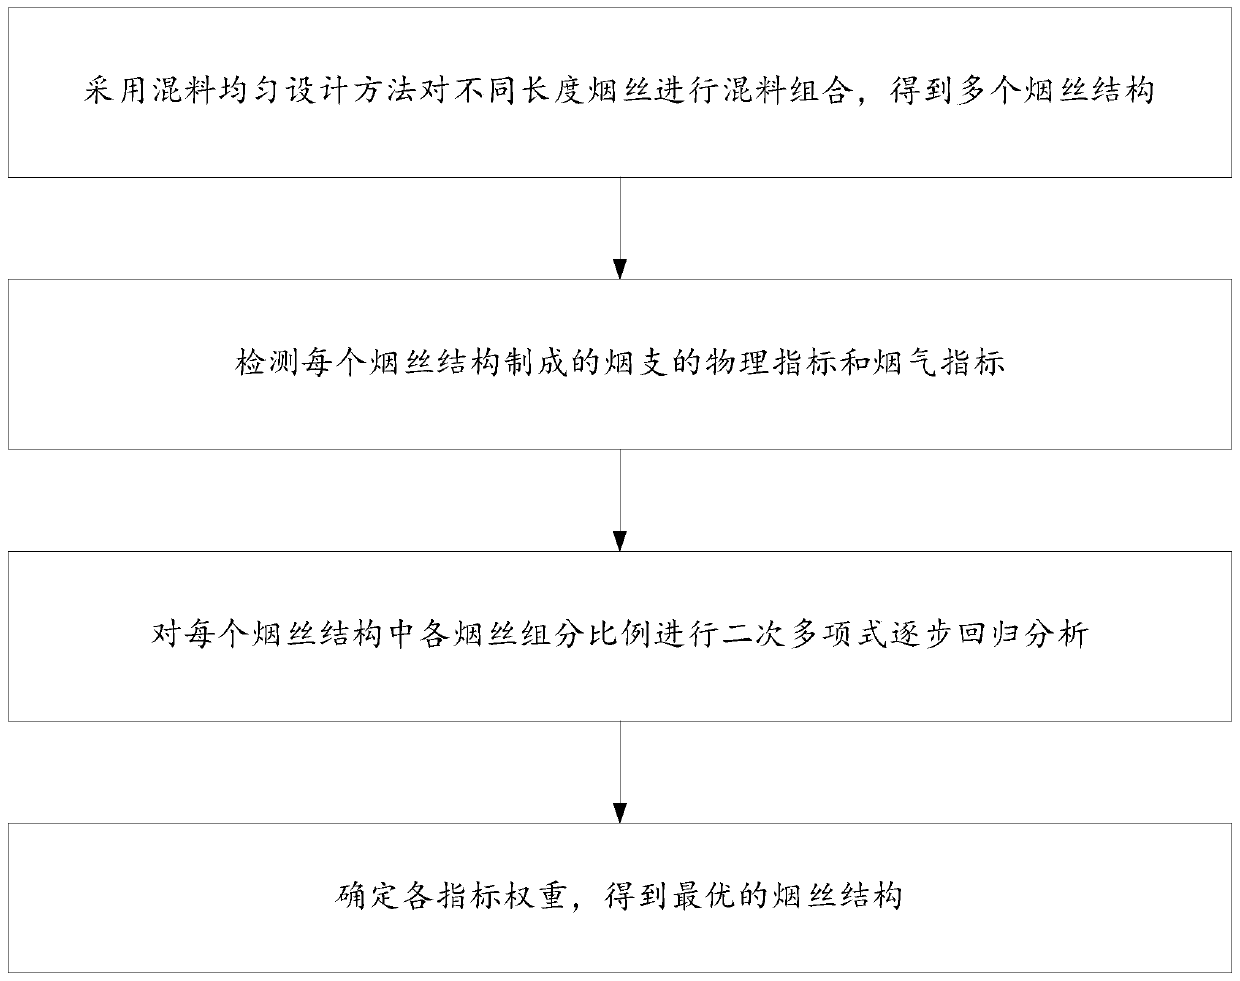 Tobacco shred structure determining method and device suitable for thin cigarettes